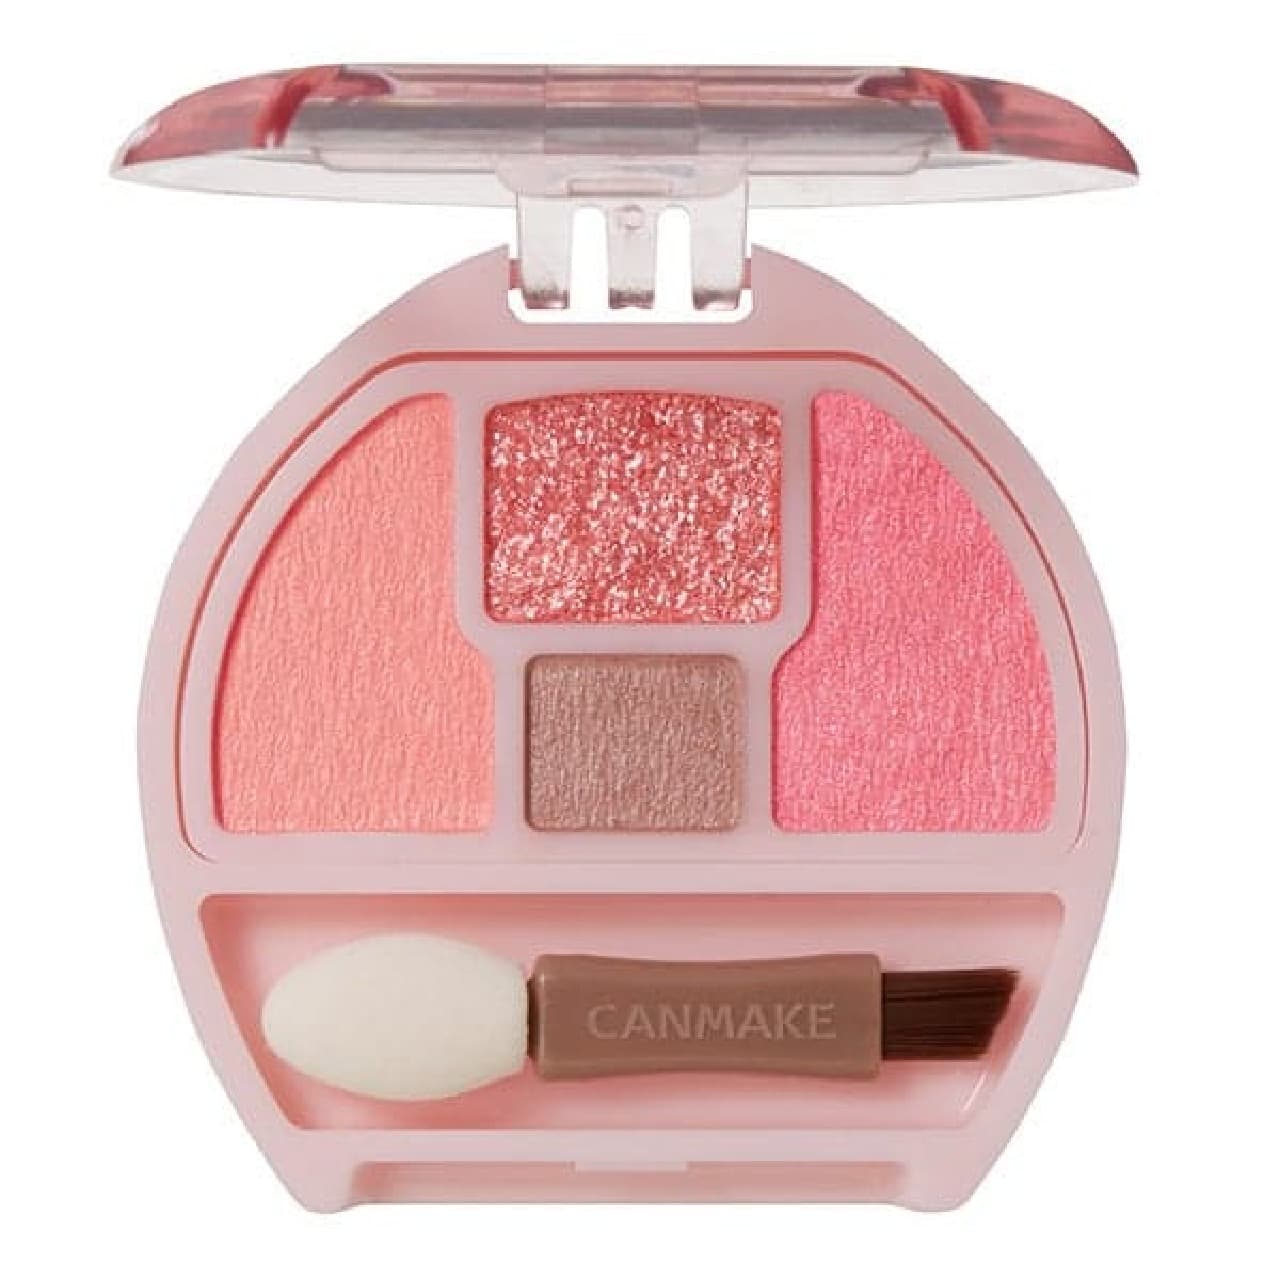 Canmake's "Plan Puku Coord Eyes" new and limited colors, strawberry design "Creamy Touch Liner", limited "Mermaid Skin Gel UV" to be released in late February 2024 Image 3